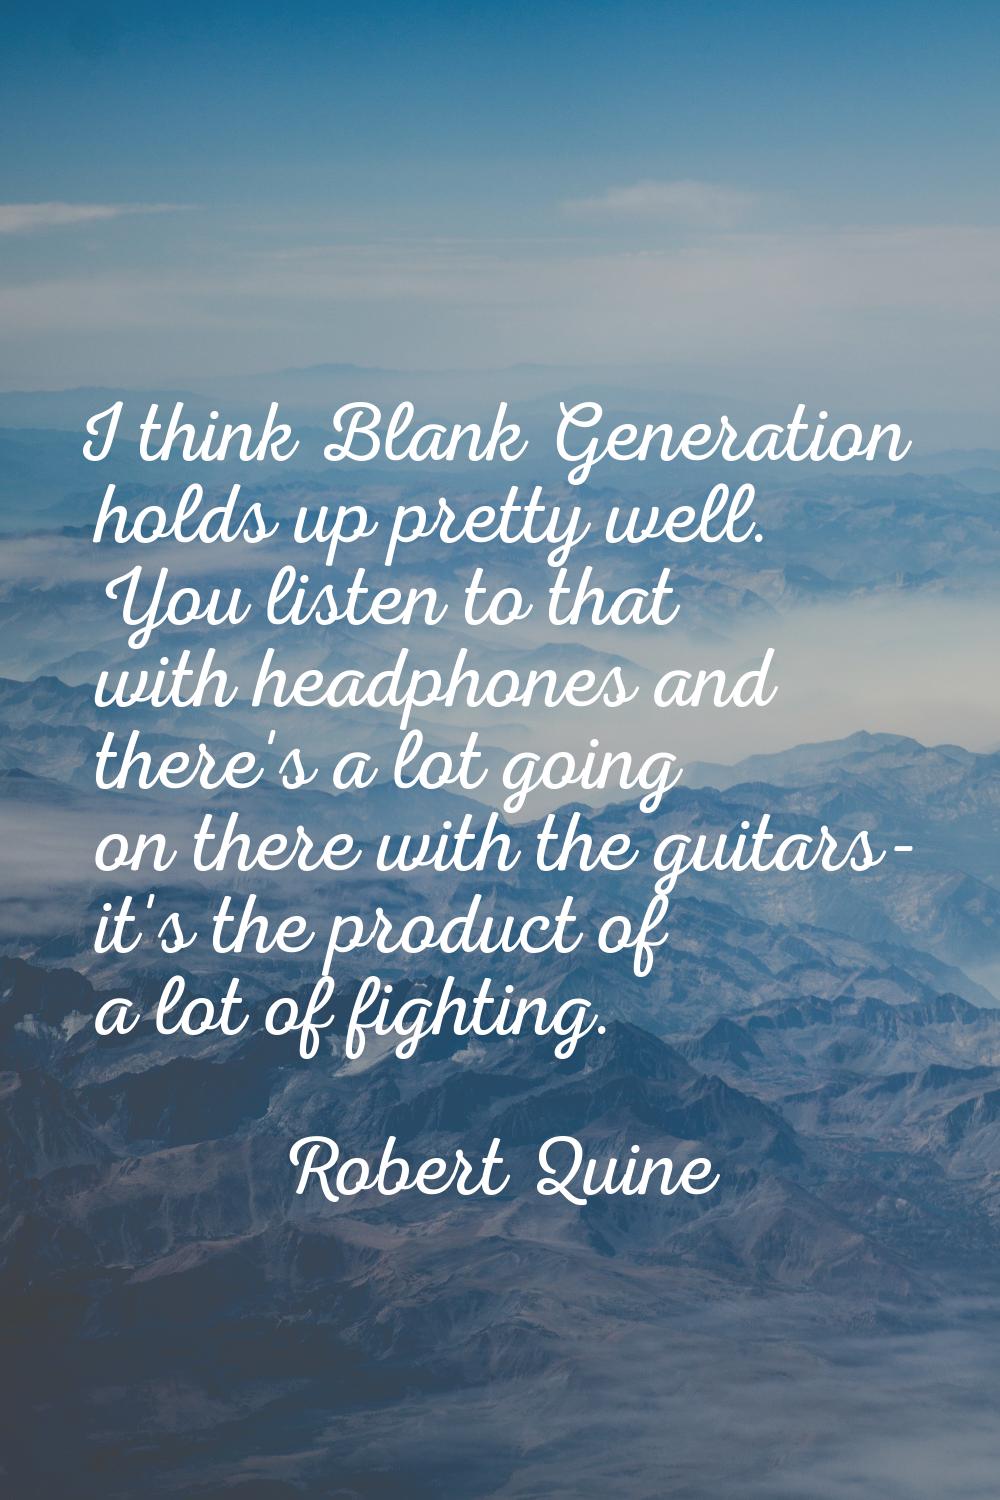 I think Blank Generation holds up pretty well. You listen to that with headphones and there's a lot